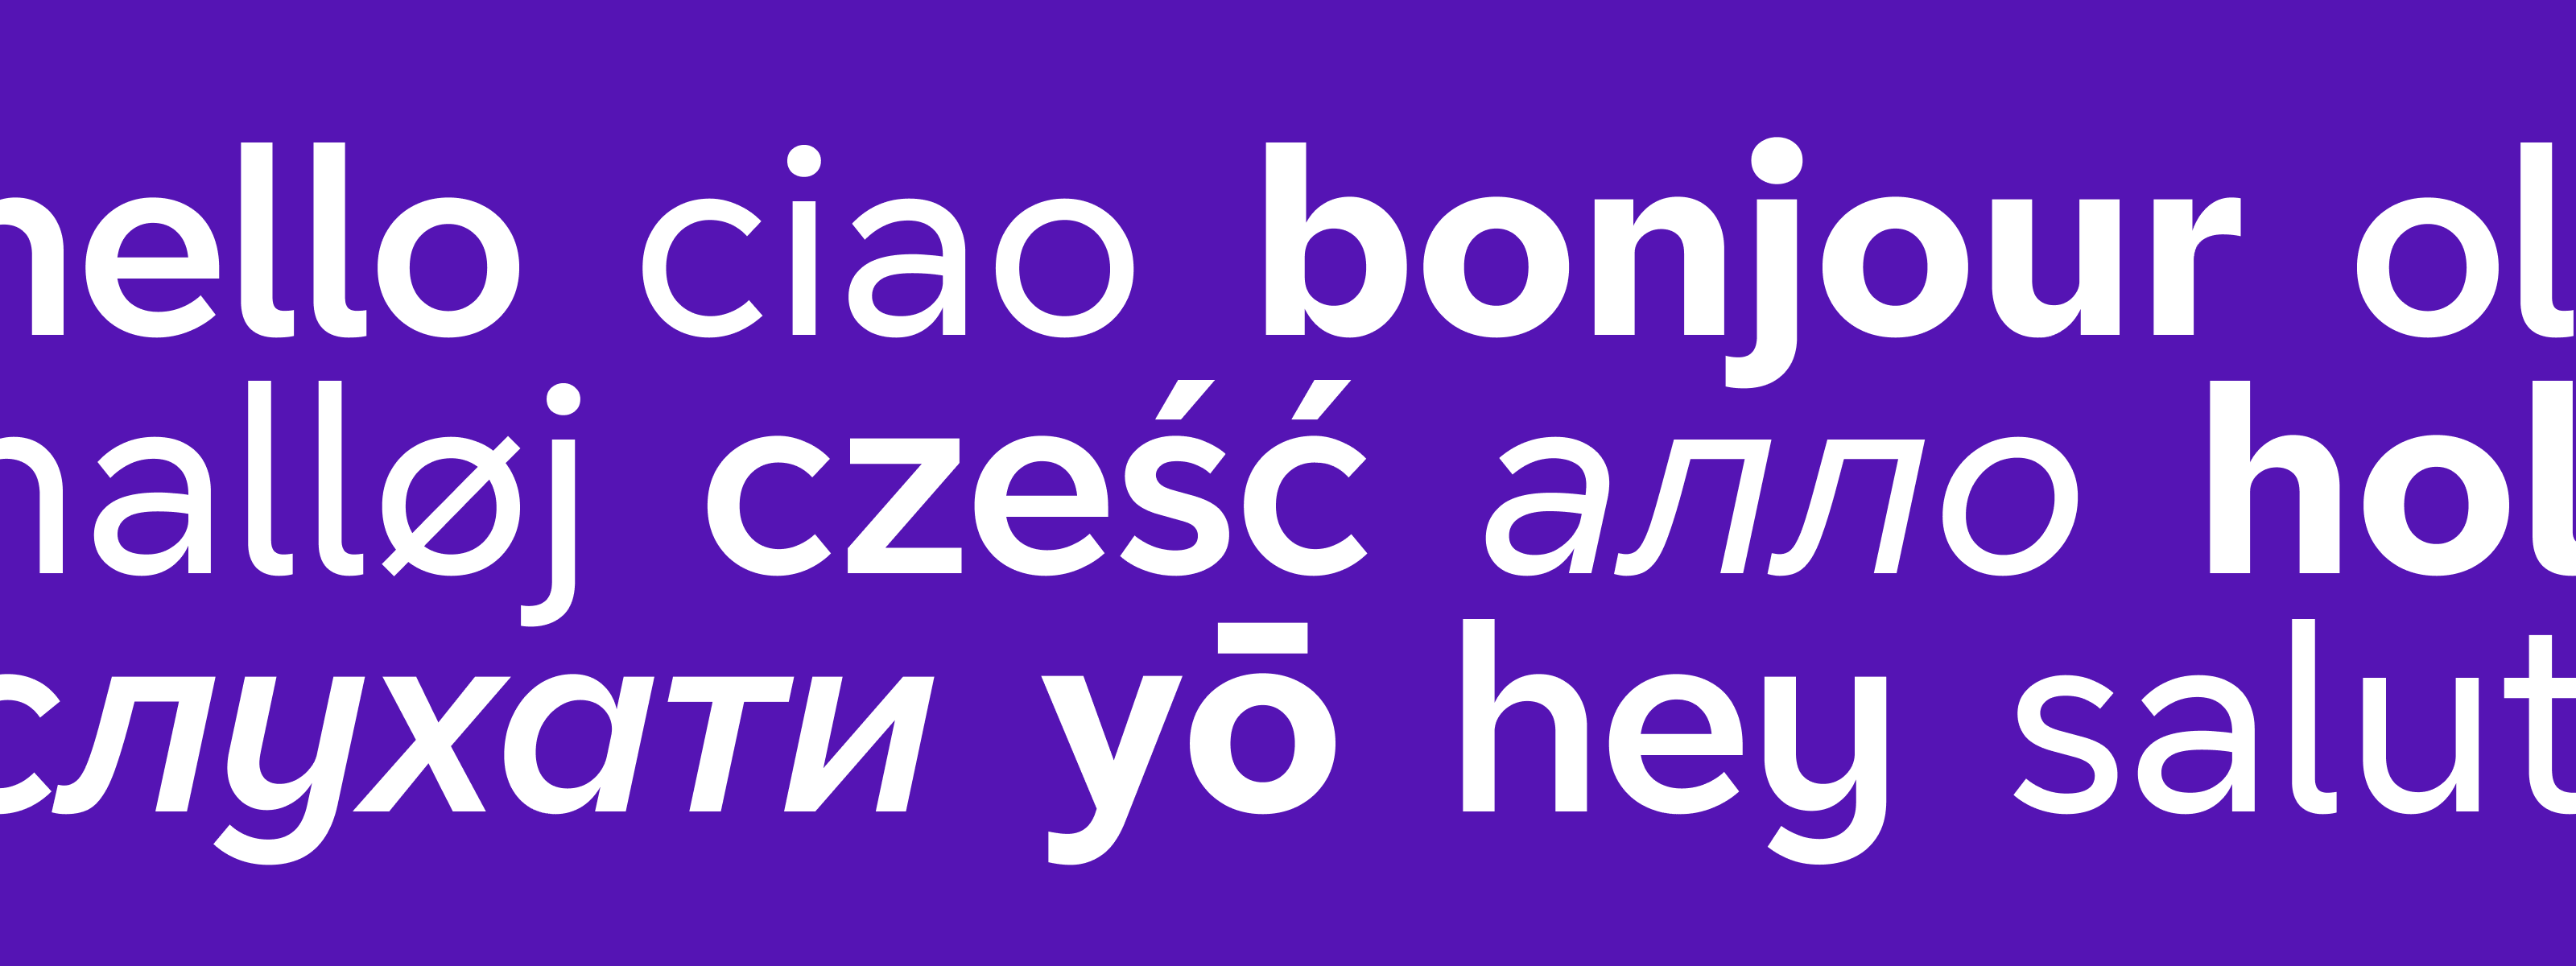 BT_typeface_example_01